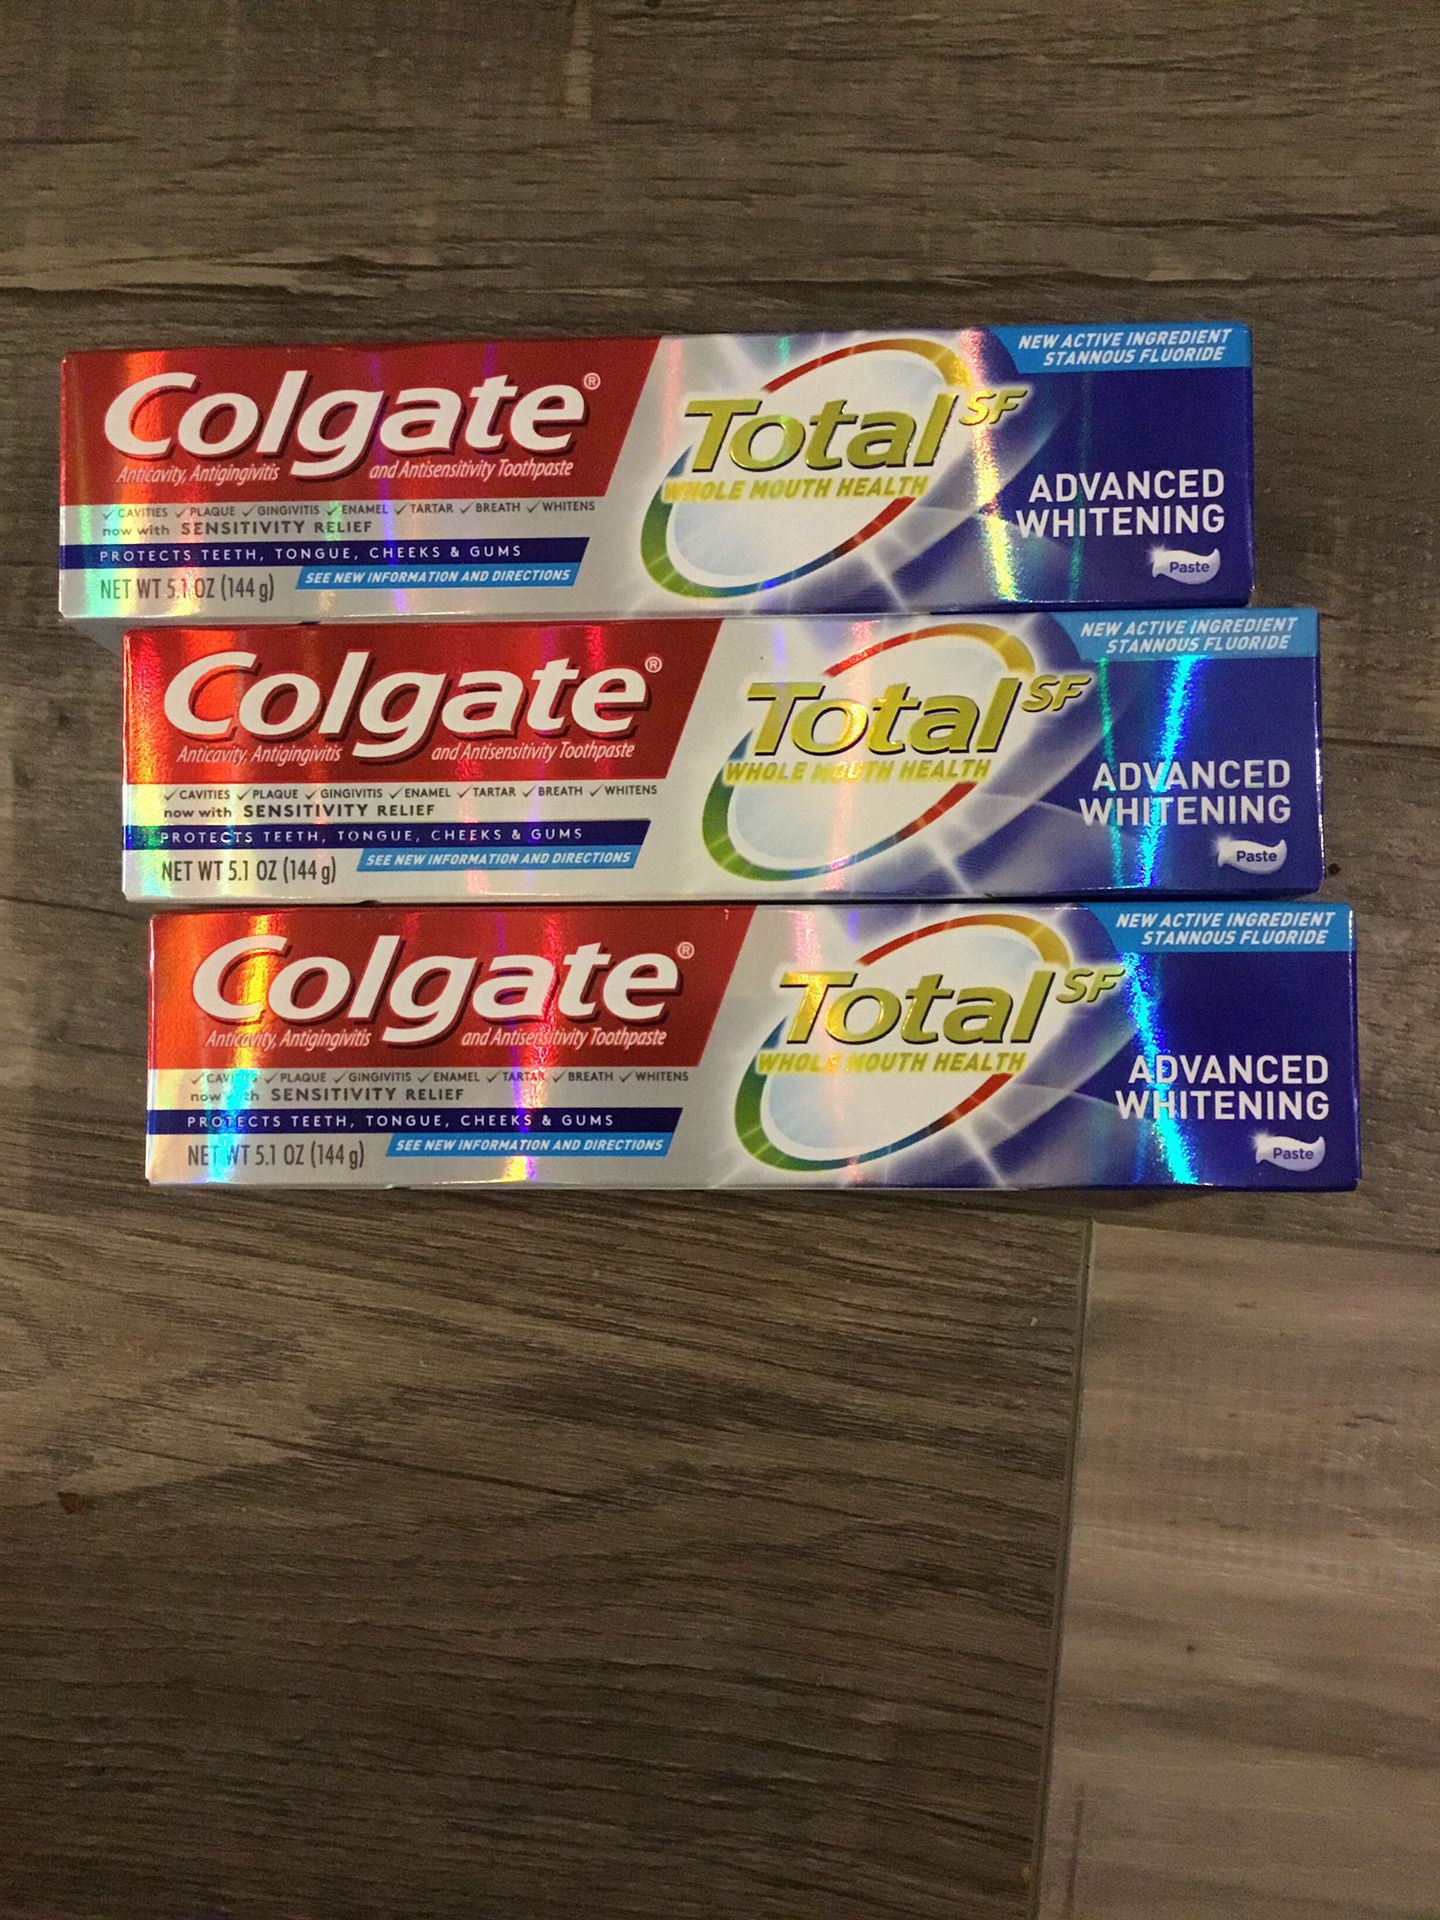 Colgate total SF advanced whitening toothpaste $2 each